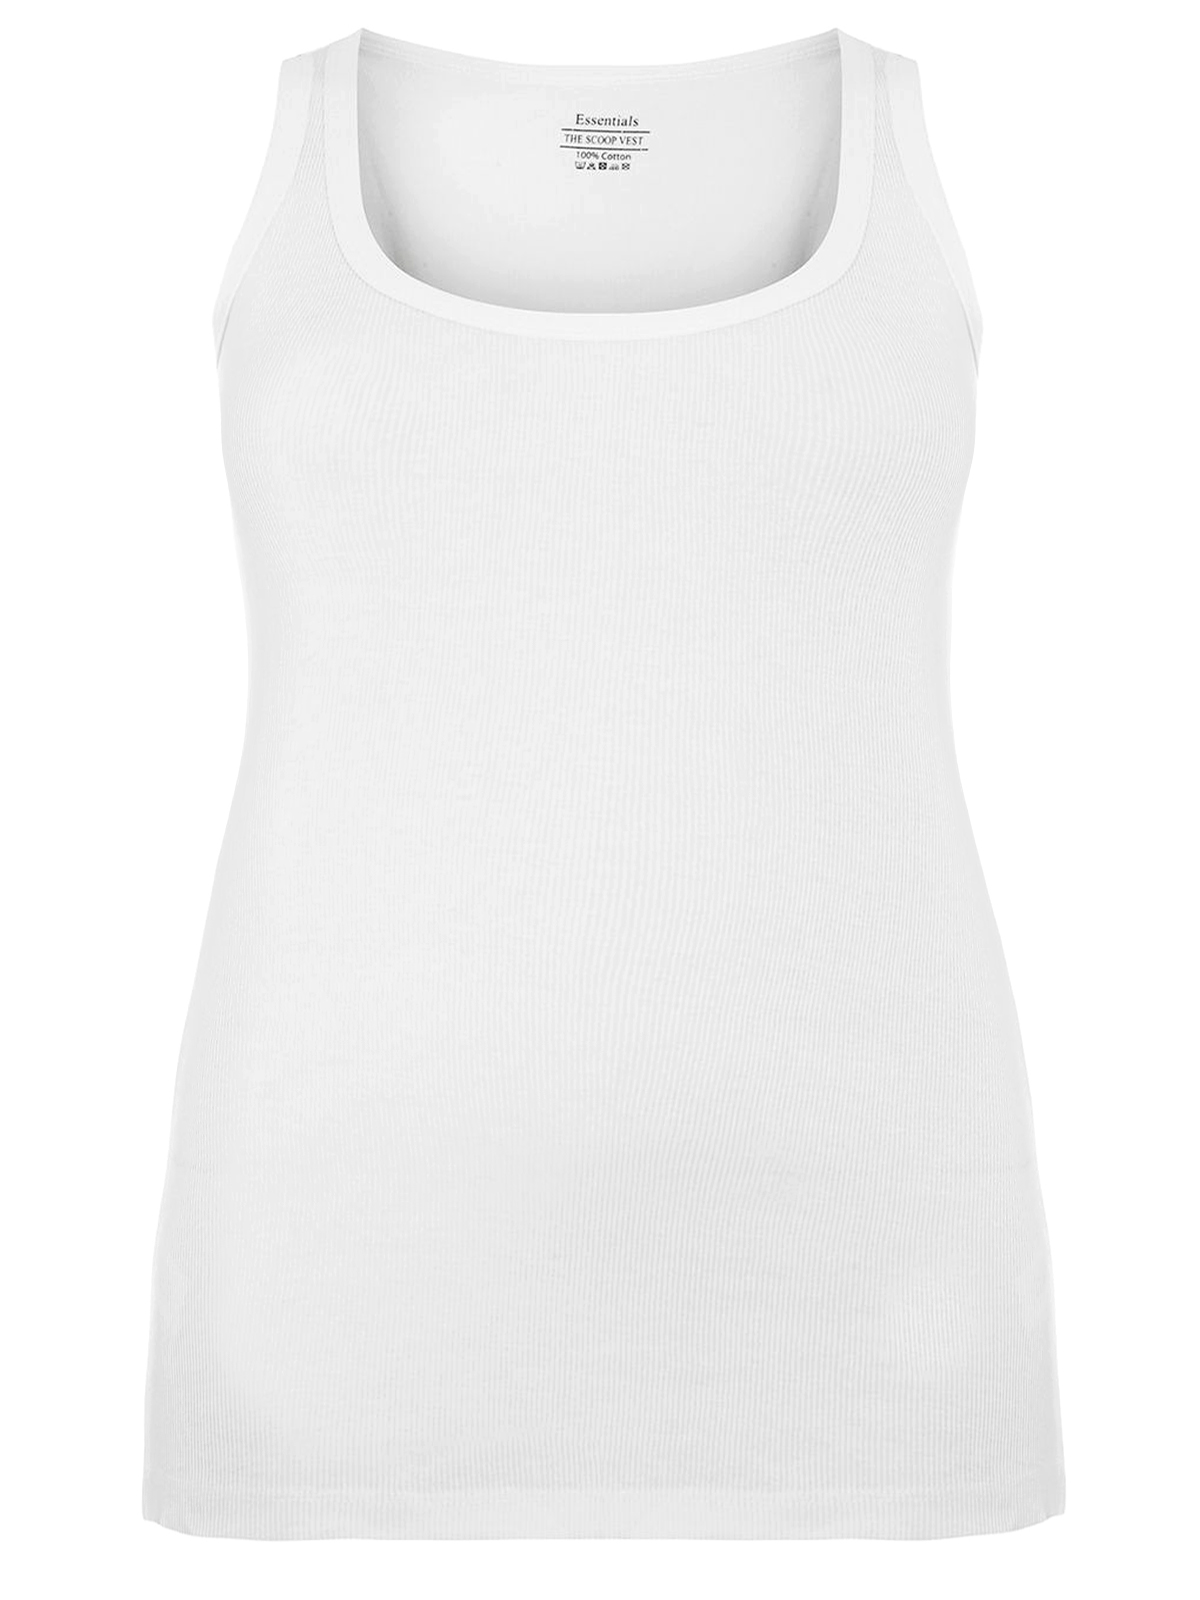 3vans WHITE Pure Cotton Ribbed The Scoop Vest - Plus Size 14 to 30/32